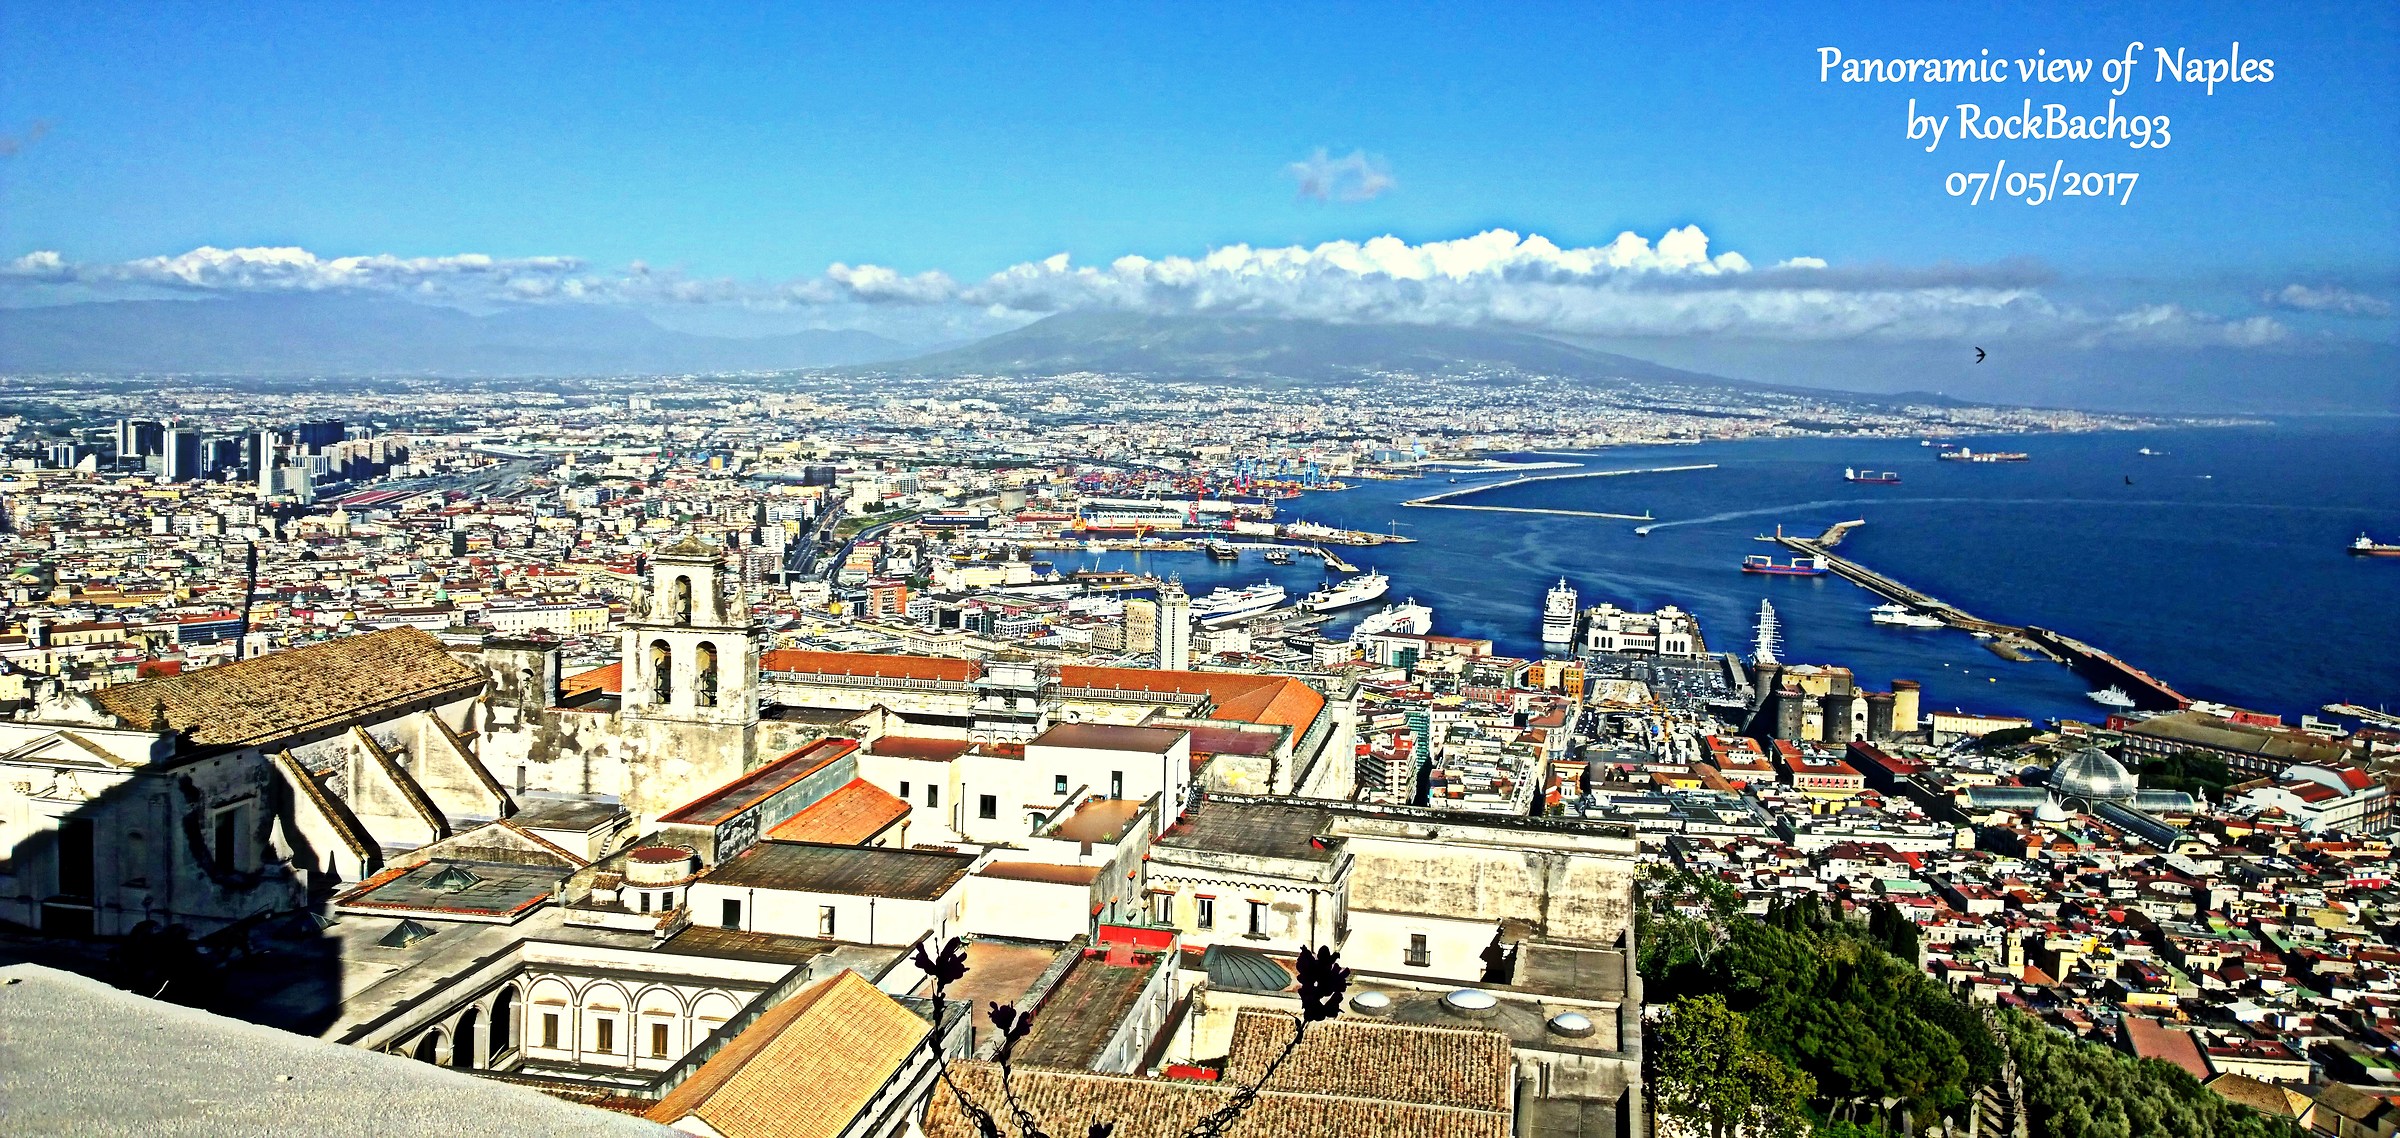 Gulf of Naples seen from Castel Sant'Elmo....